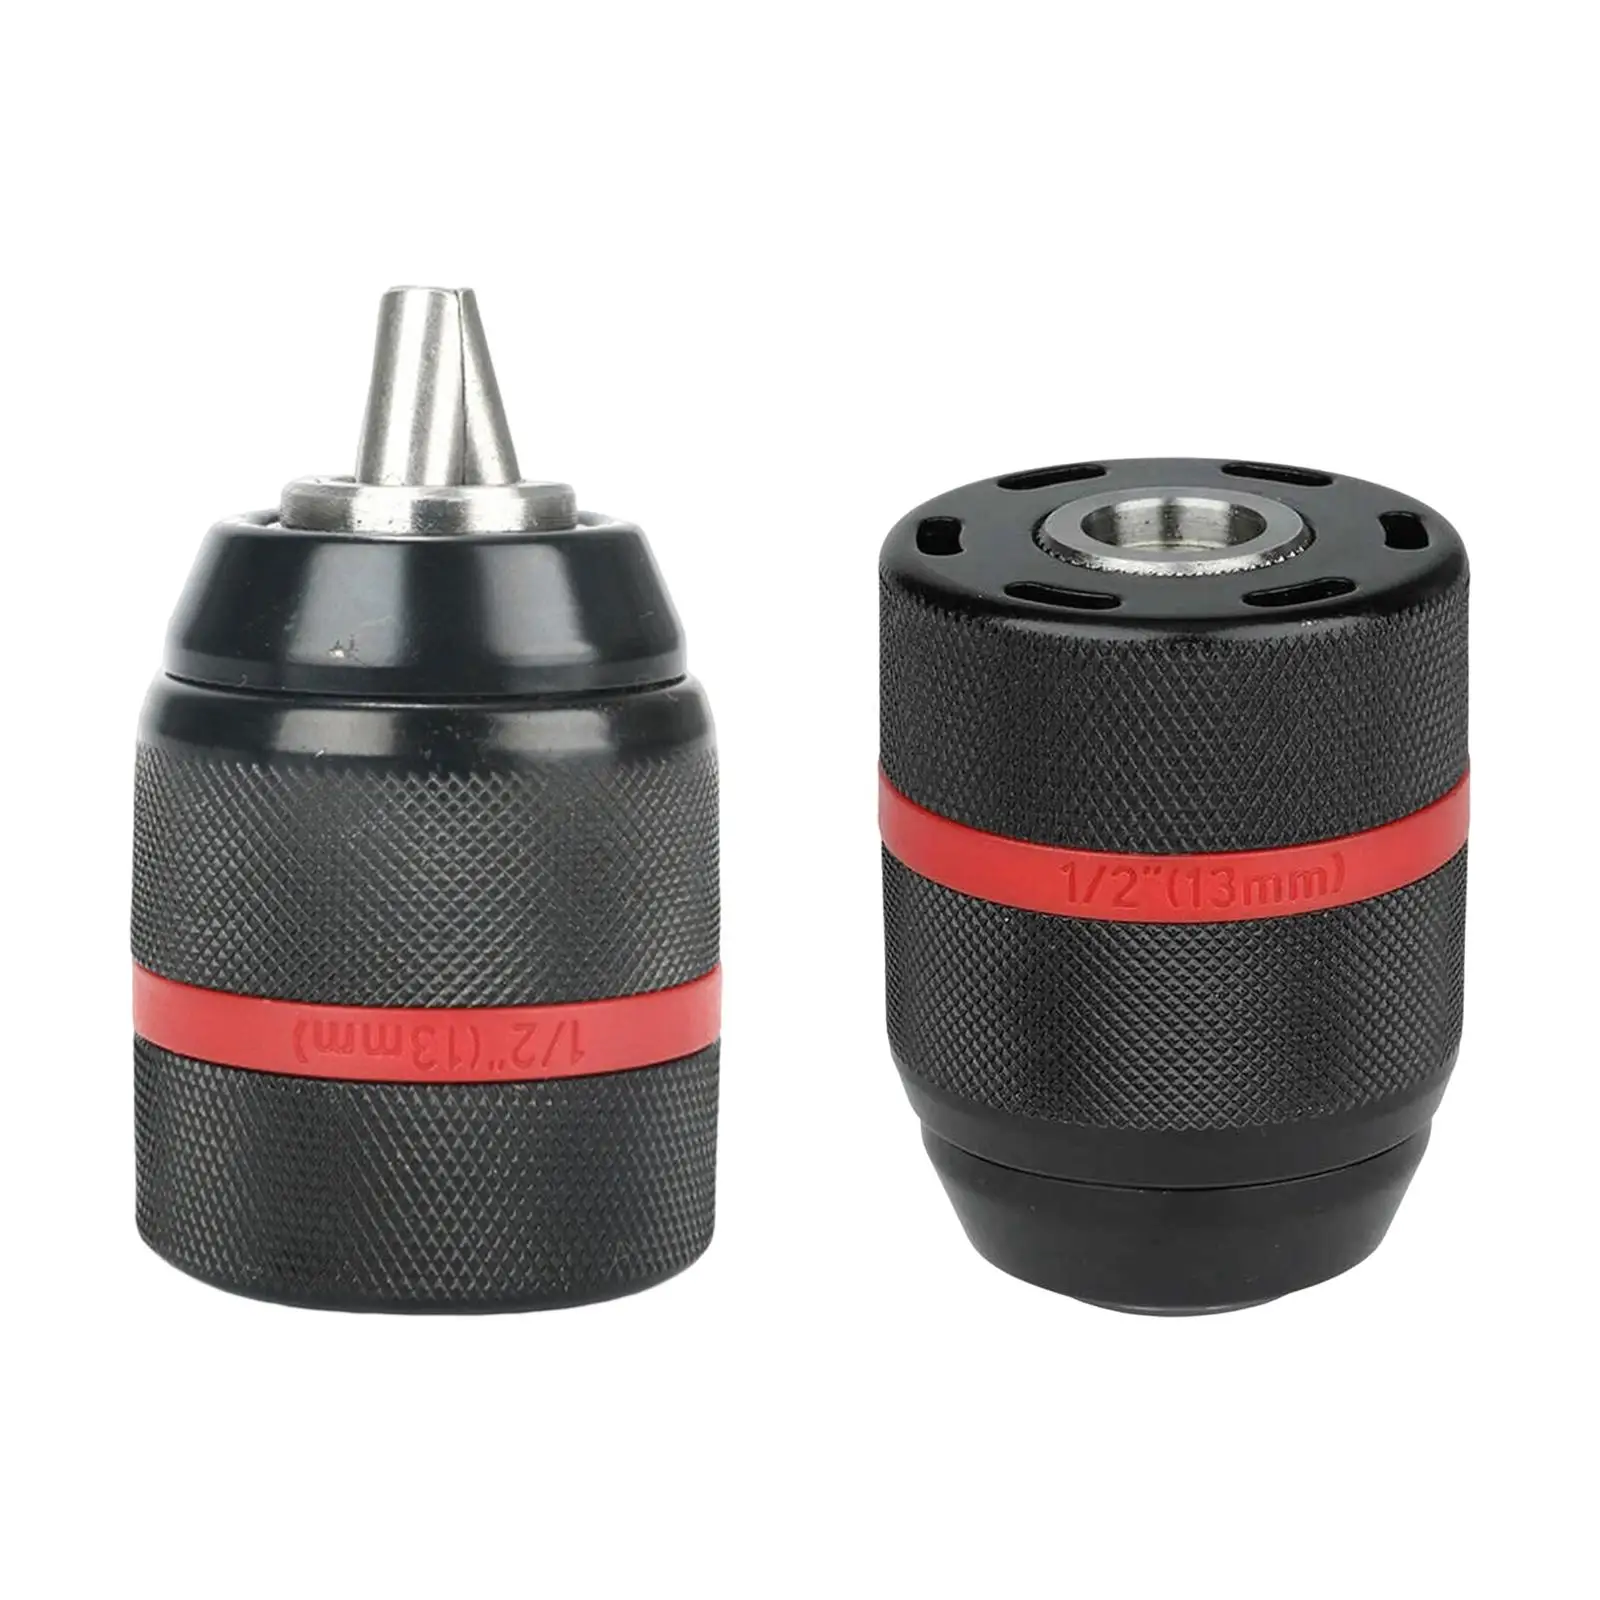 13mm Keyless Drill Chuck Adapter Durable Convenient Practical Metal Heavy Duty Conversion Adapter for Multiple Purposes Drills